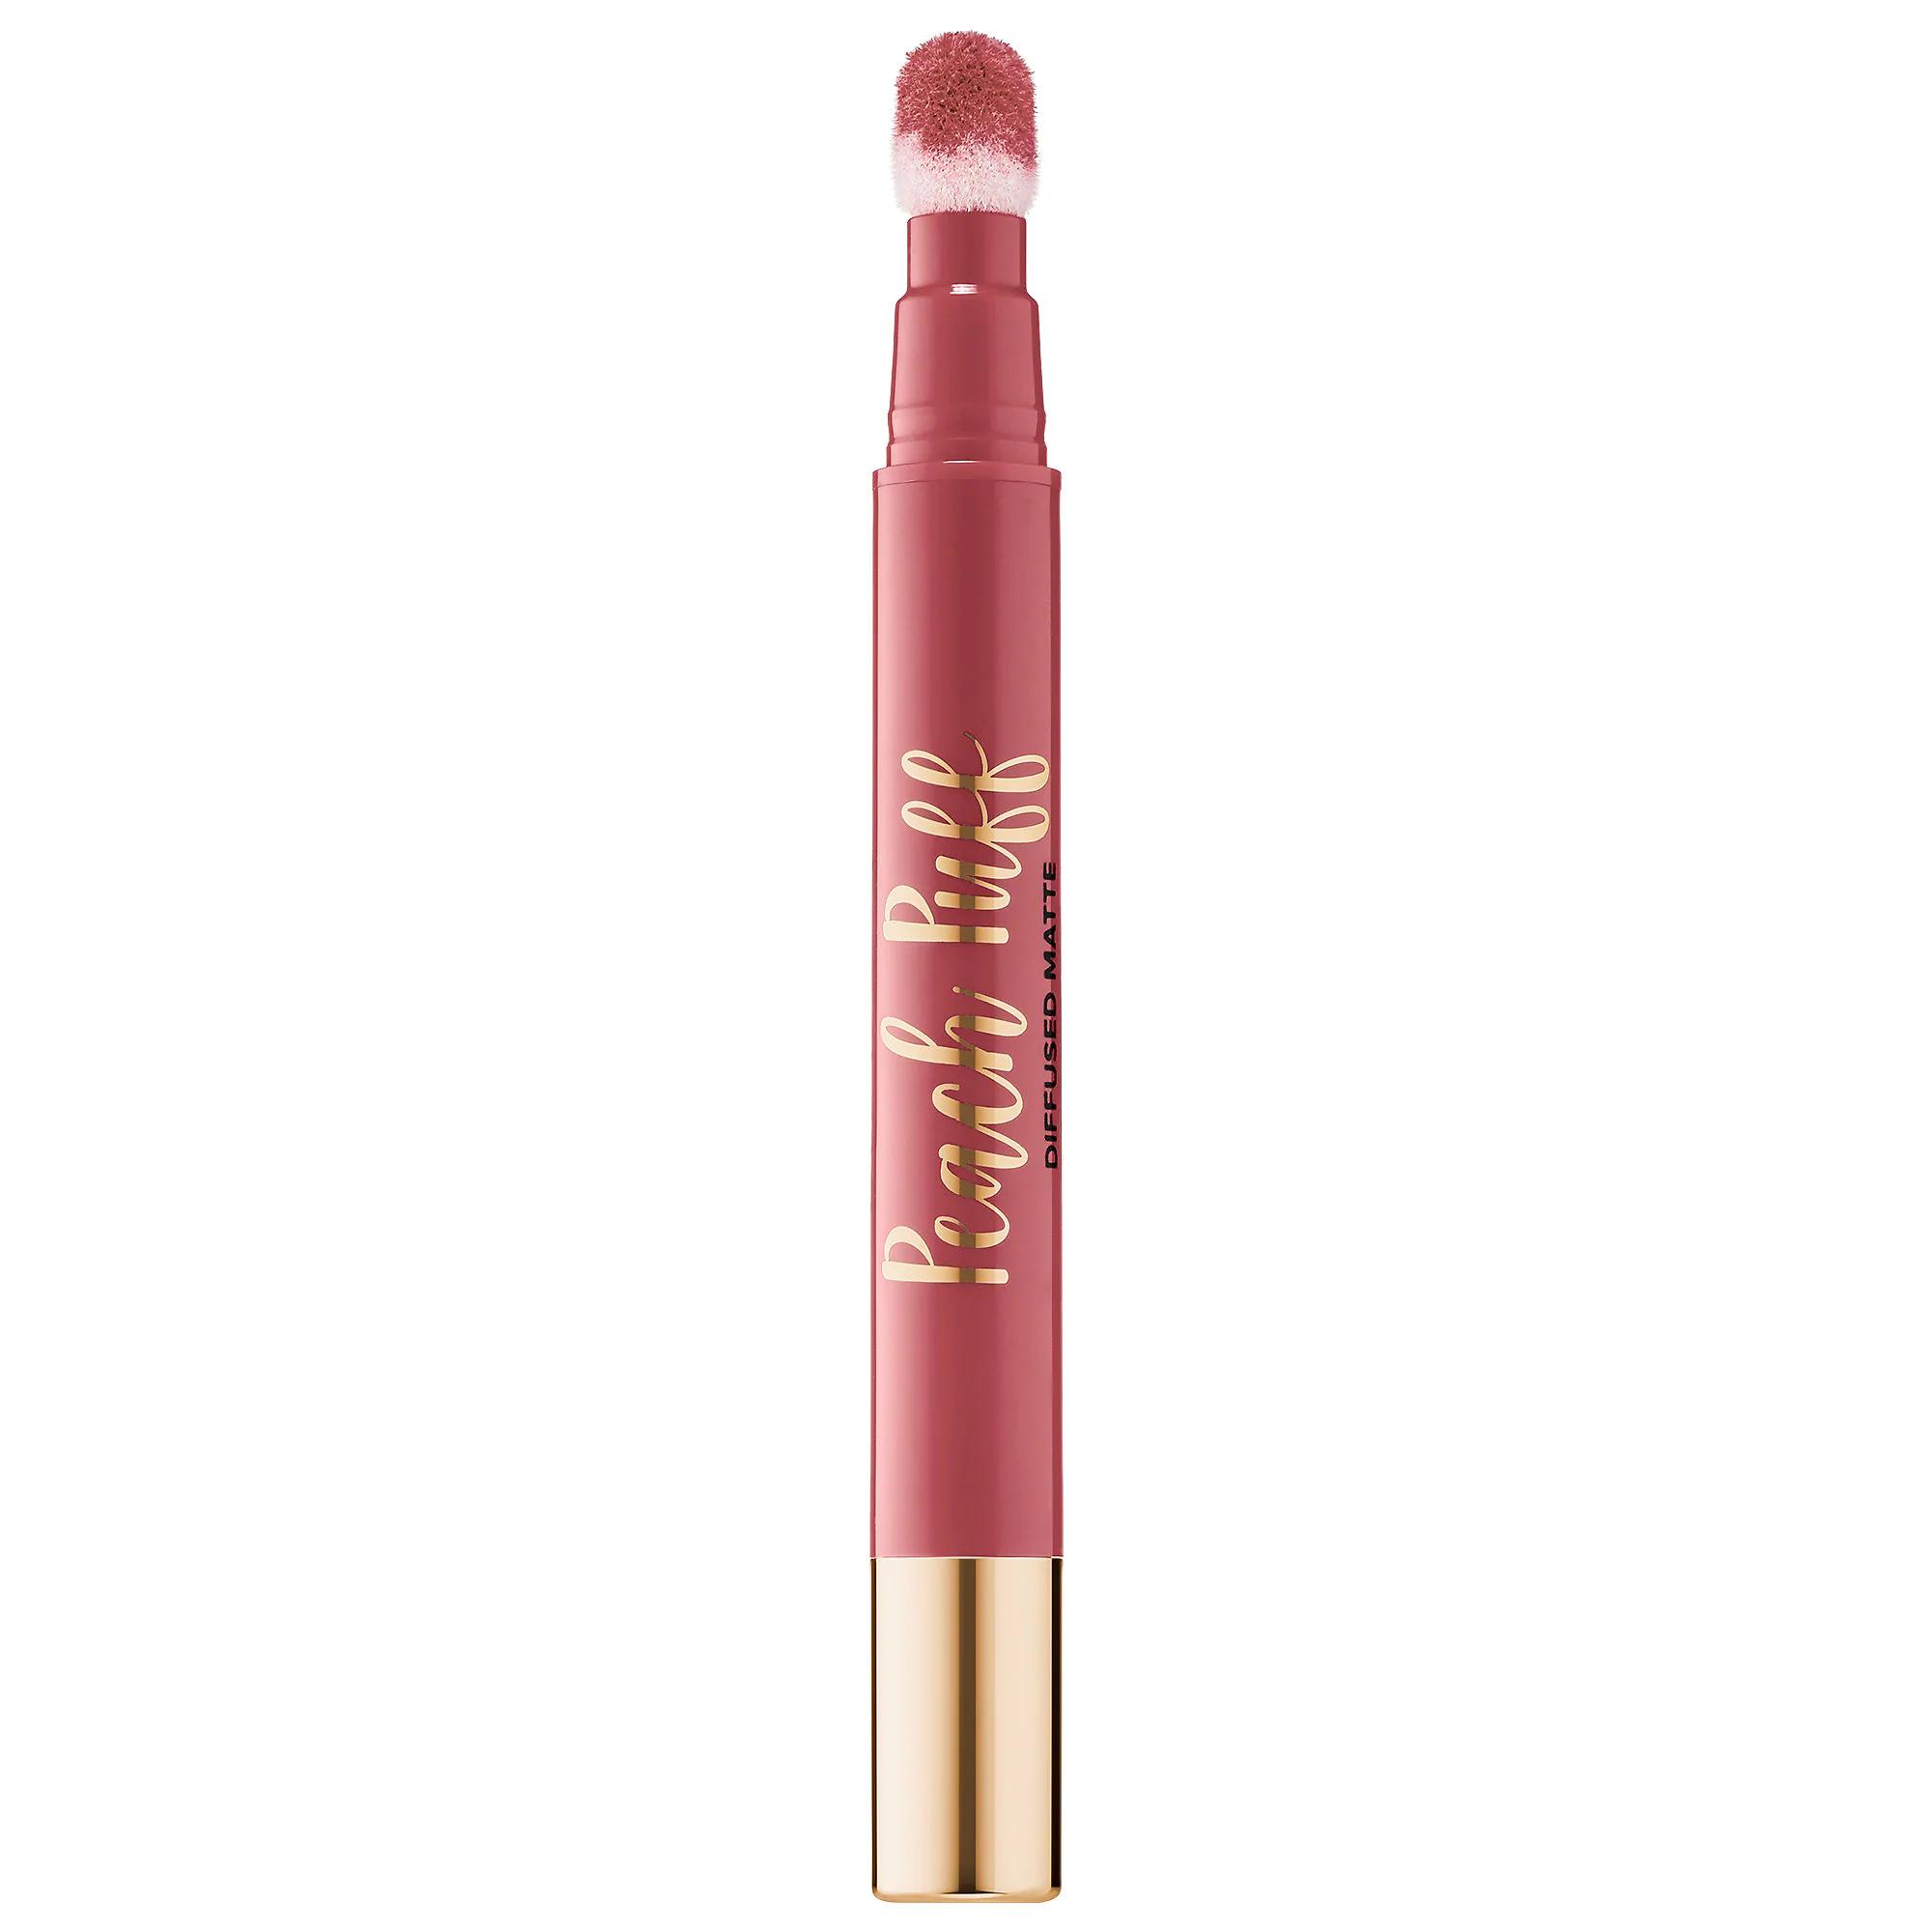 Too Faced Peach Puff Matte Lip Color Scary Spice